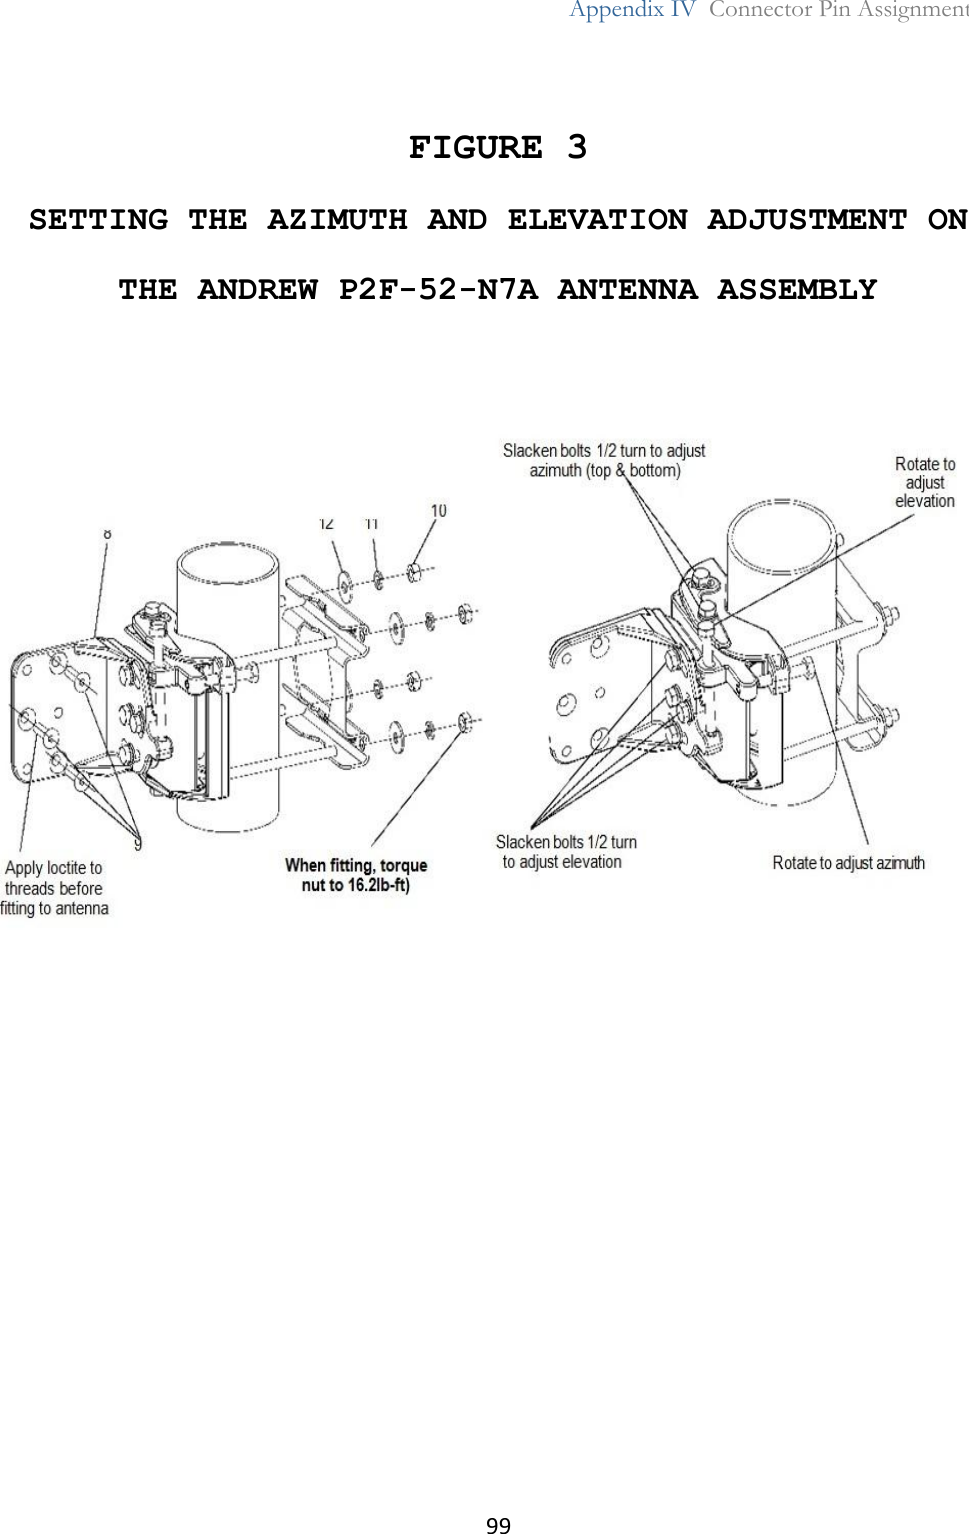 99  Appendix IV  Connector Pin Assignment   FIGURE 3 SETTING THE AZIMUTH AND ELEVATION ADJUSTMENT ON  THE ANDREW P2F-52-N7A ANTENNA ASSEMBLY         